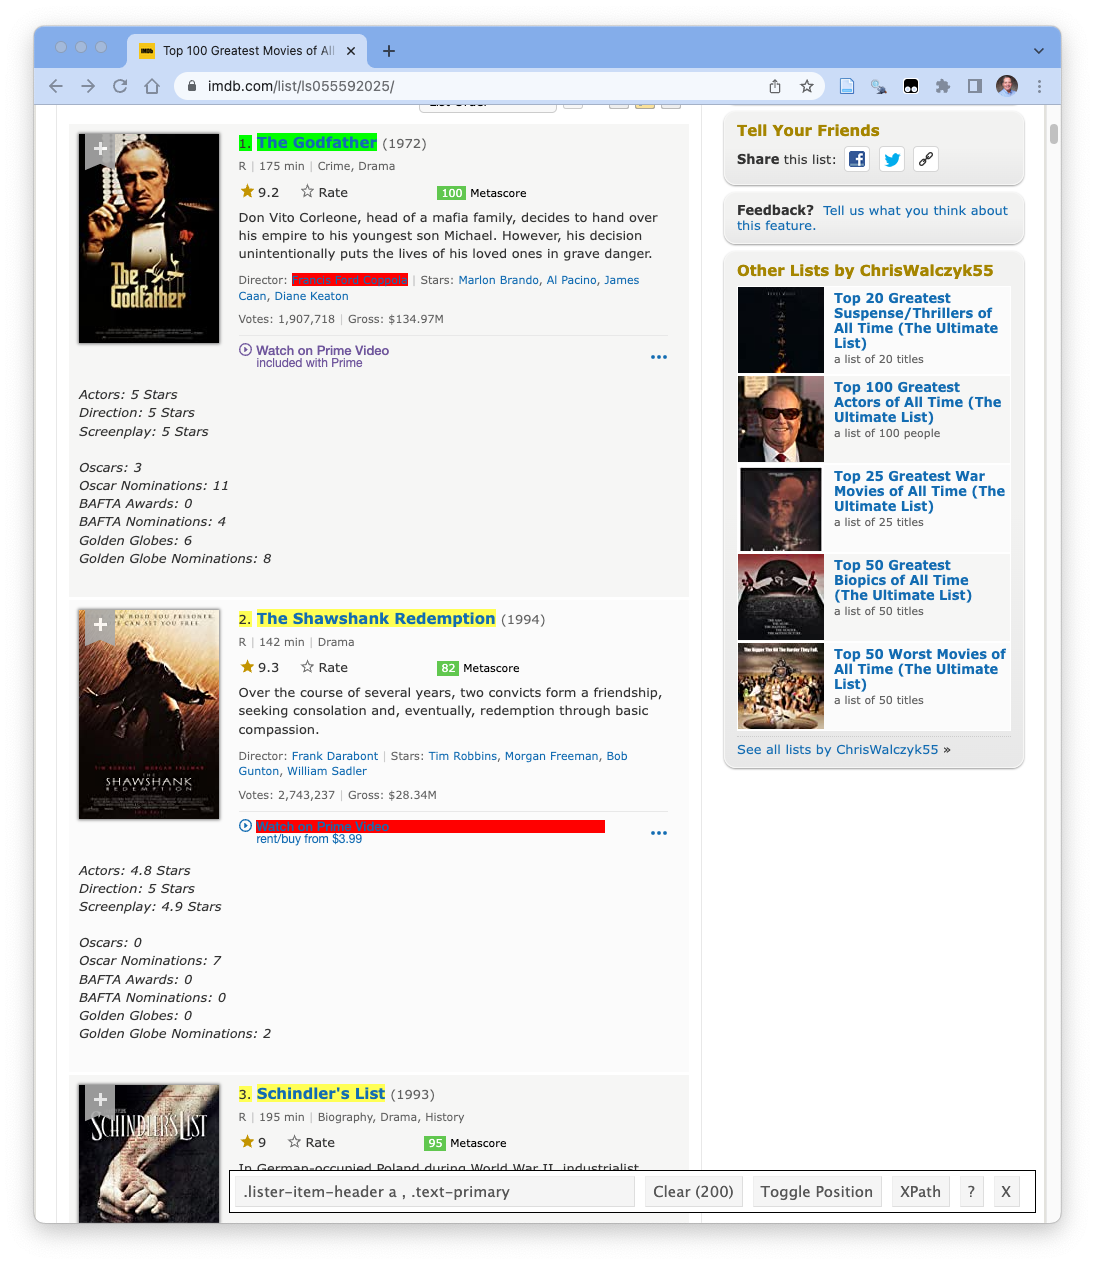 Now the web page shows the same elements items highlighted in green, the rank and title for other movies highlighted in yellow and some other elements highlighted in red with 200 items selected.